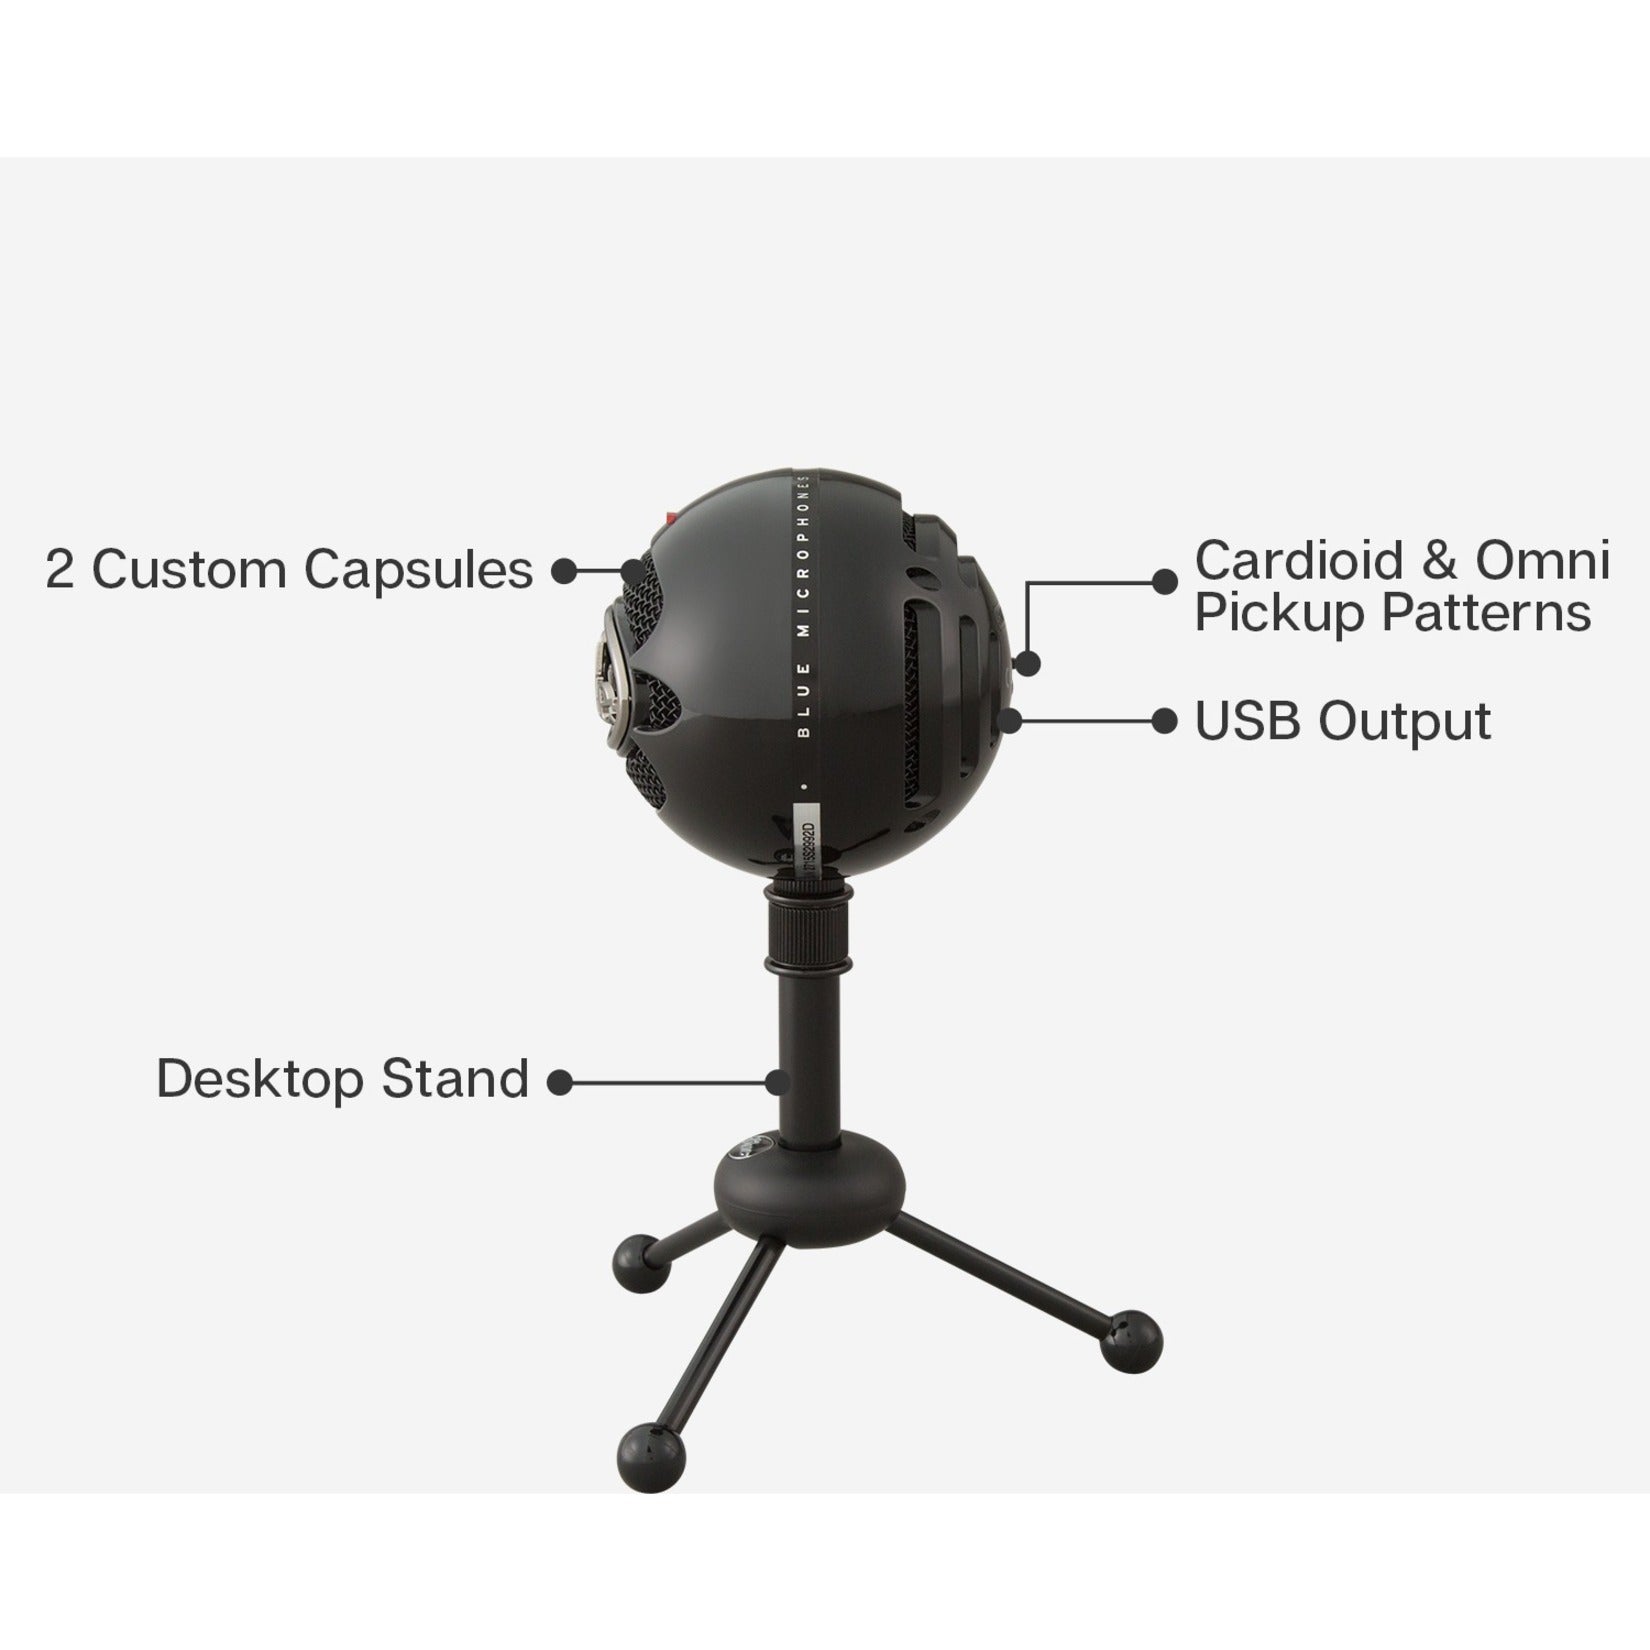 Blue 988-000069 Snowball Classic Studio-Quality USB Microphone, 2 Year Limited Warranty, Cardioid & Omni-directional Polar Pattern, Stand Mountable, Condenser Technology